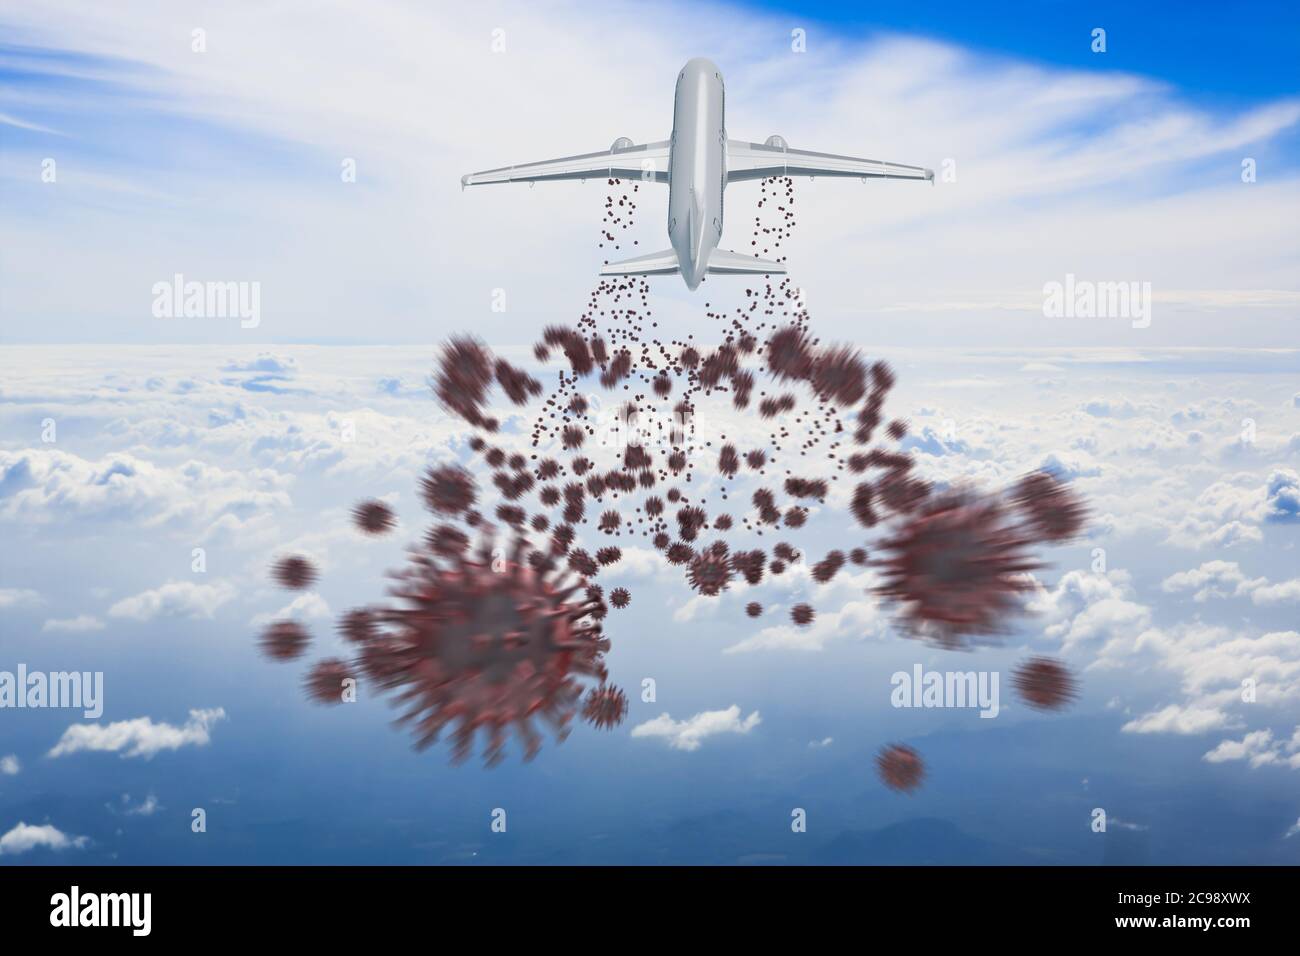 Spreading the corona virus concept: A starting airplane emitting corona viruses - metaphor for air travellers spreading the virus over the world. Stock Photo